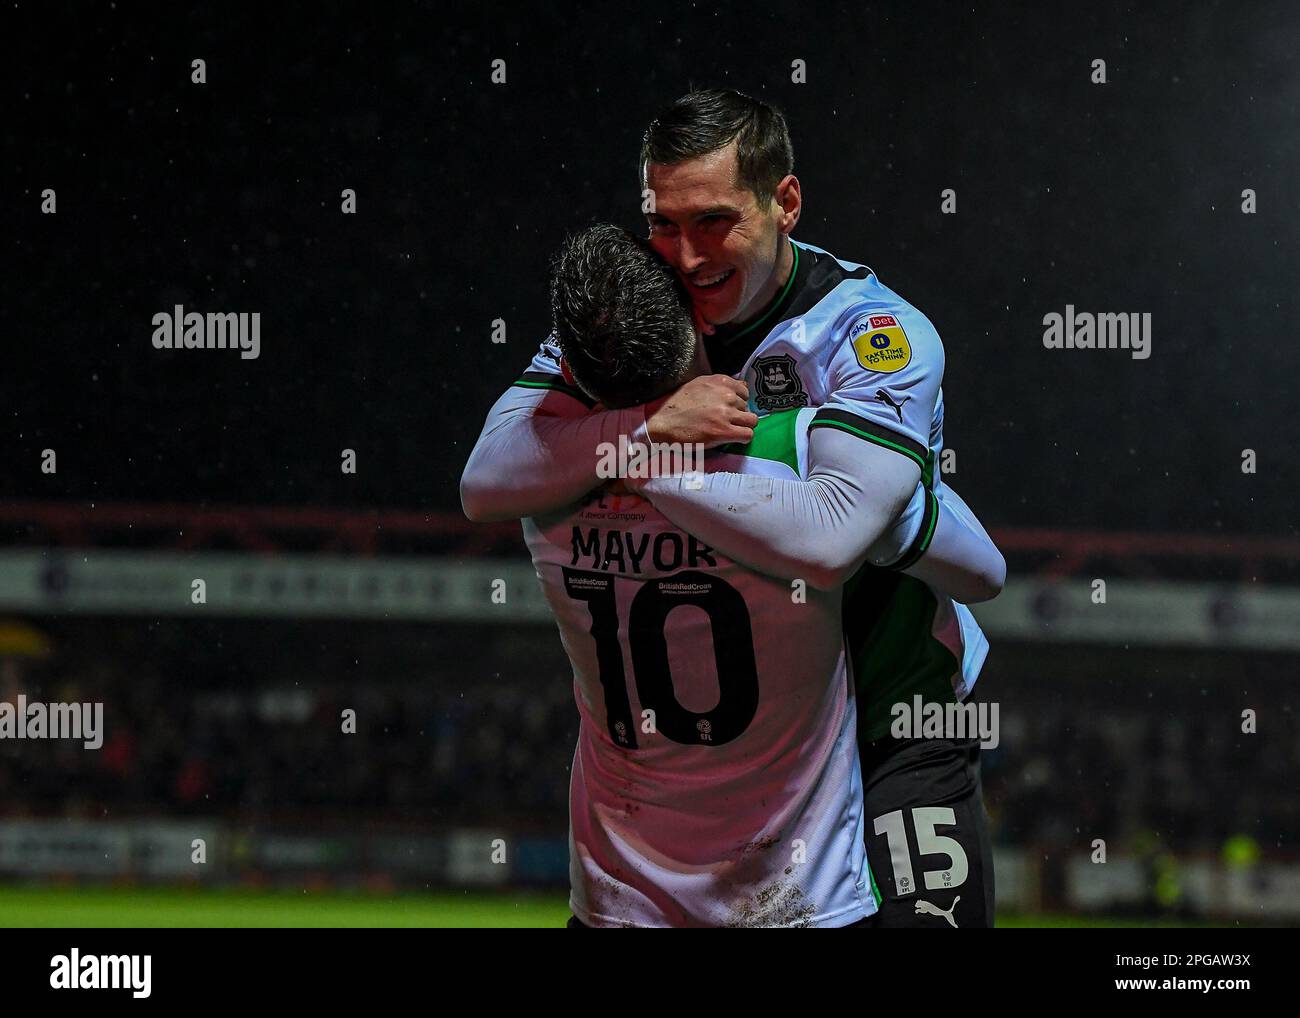 Conor Grant #15 of Plymouth Argyle shoots and scores a goal scores to make it 0-2during the Sky Bet League 1 match Accrington Stanley vs Plymouth Argyle at Wham Stadium, Accrington, United Kingdom, 21st March 2023  (Photo by Stan Kasala/News Images) Stock Photo